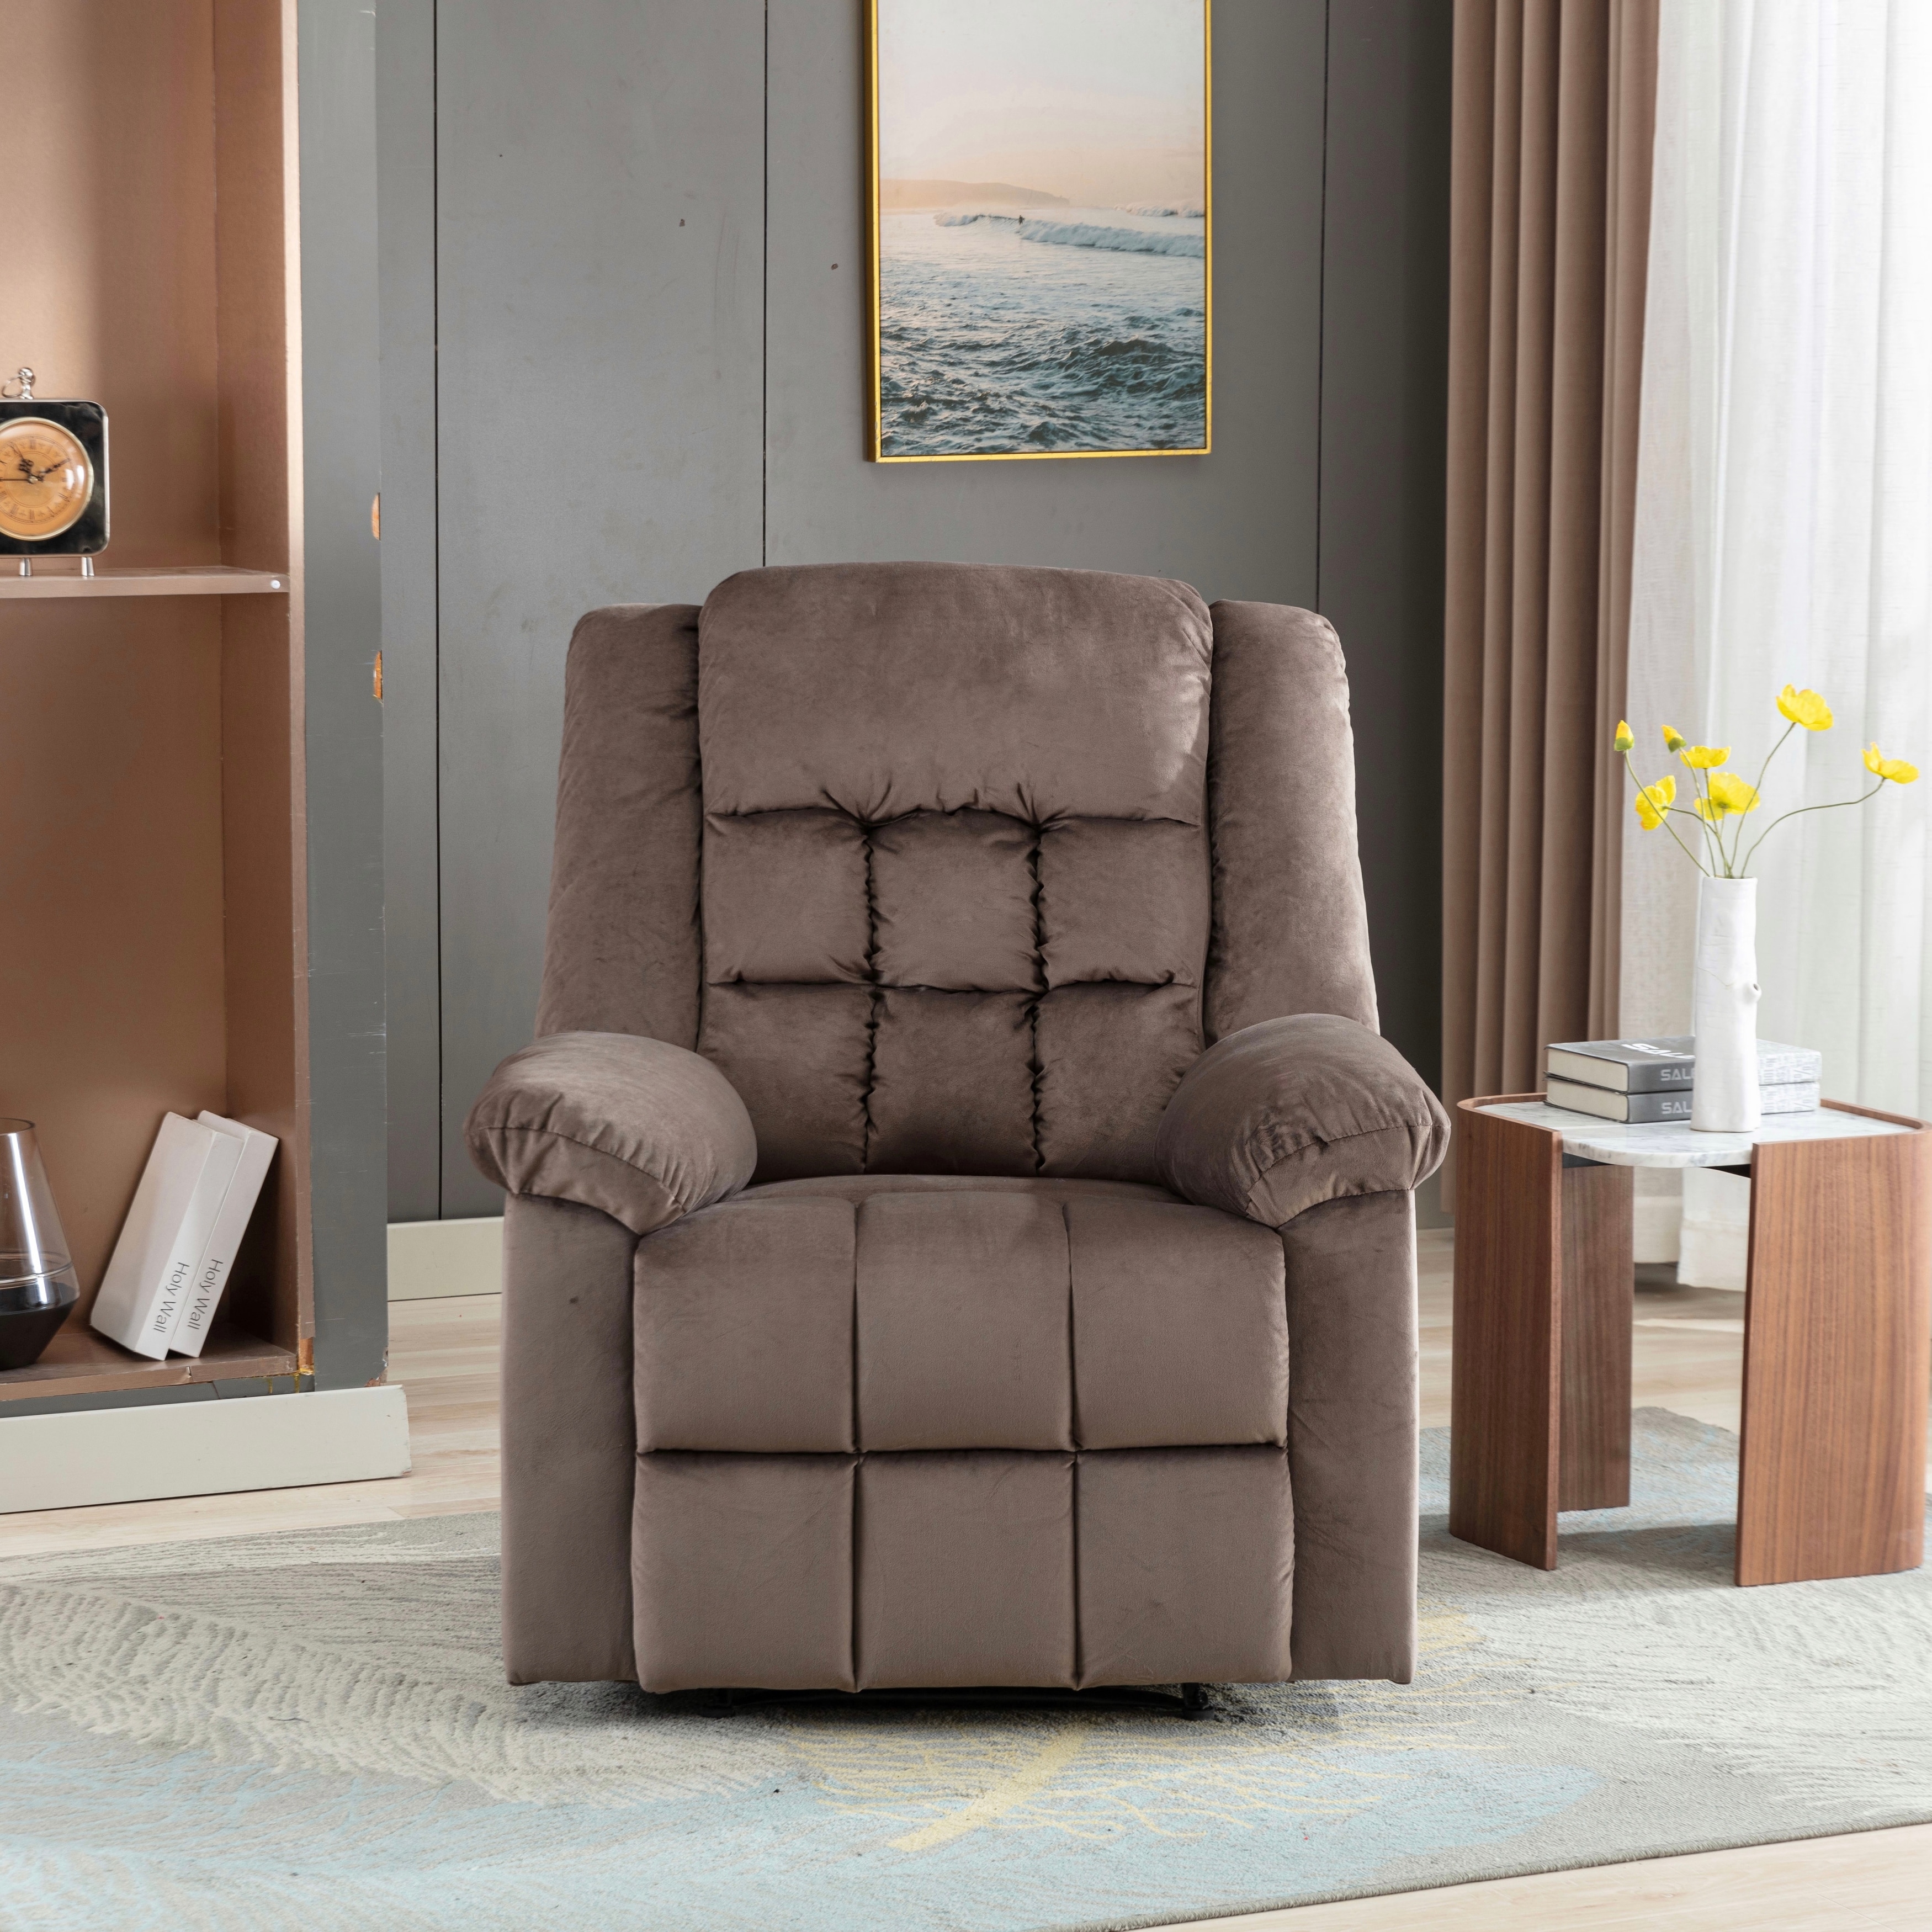 https://ak1.ostkcdn.com/images/products/is/images/direct/eeeac536766089356022a0a29cf7053063f04cb9/Classic-Manual-Recliner%2C-Fabric-Recliner-Sofa-Home-Theater-Seating-with-High-resiliency-Foam-Cushions-Single-Reclining-Chair.jpg